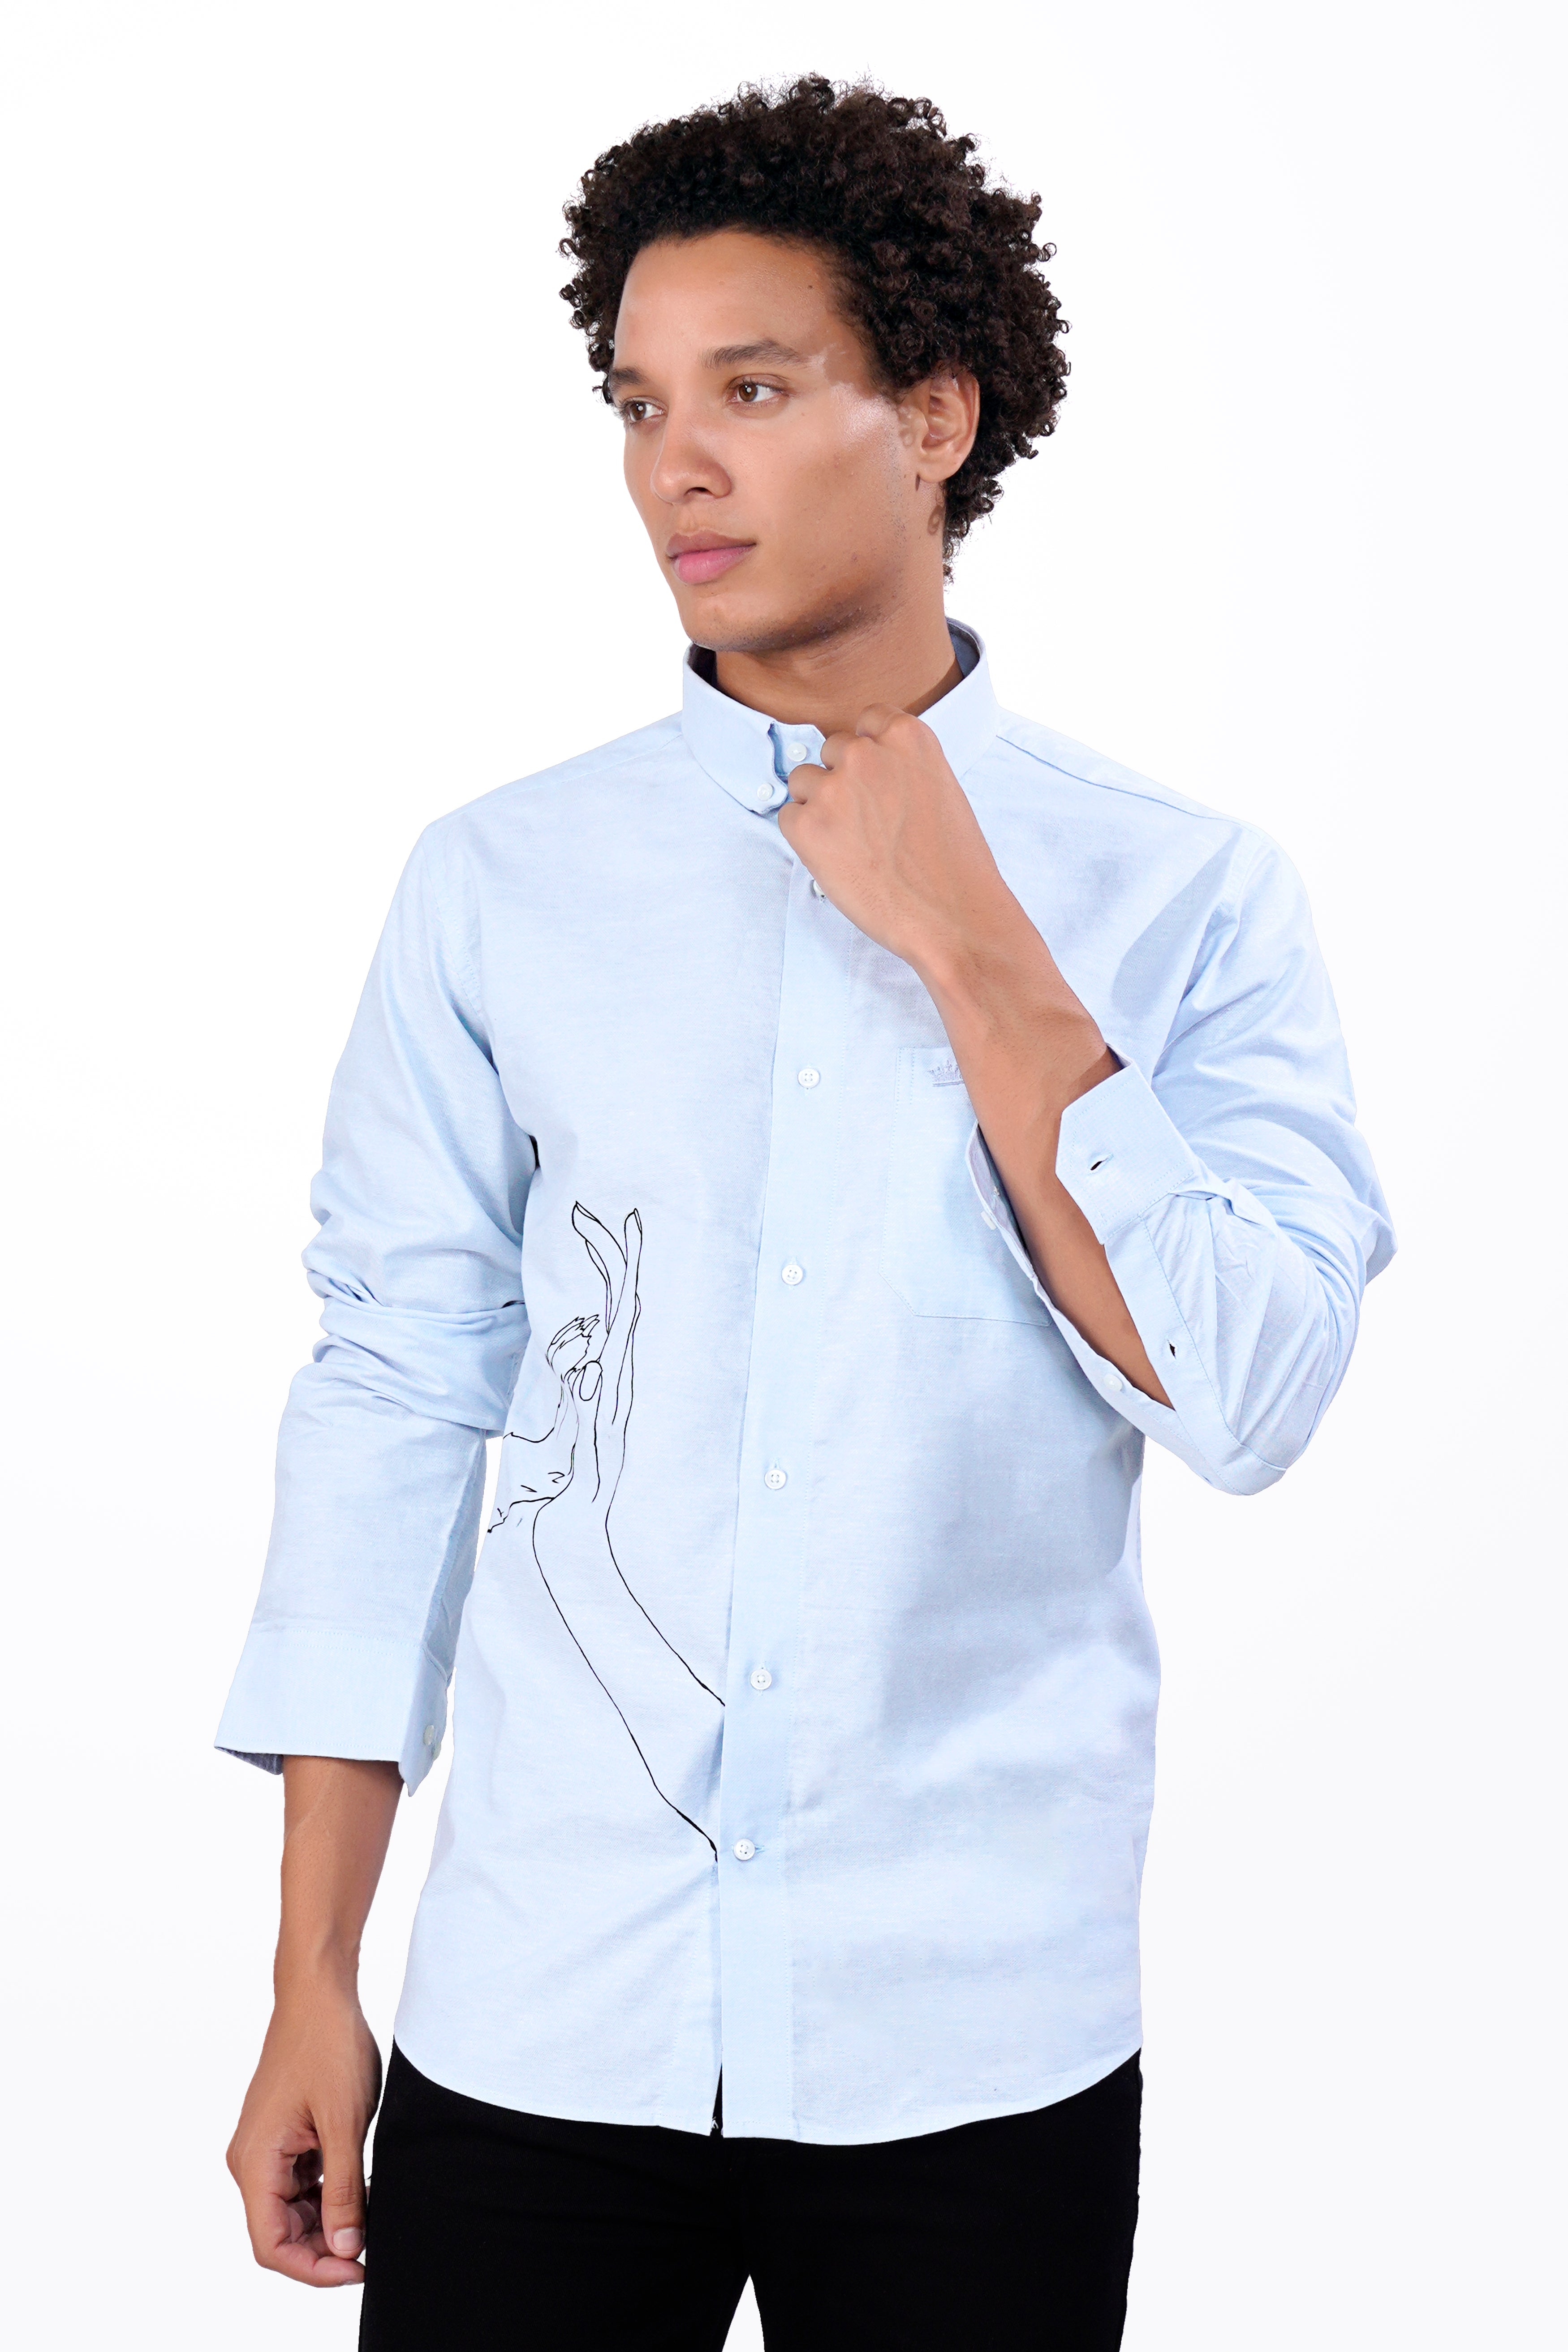 Hawkes Blue Hands Hand Painted Royal Oxford Designer Shirt 9137-BD-ART-38, 9137-BD-ART-H-38, 9137-BD-ART-39, 9137-BD-ART-H-39, 9137-BD-ART-40, 9137-BD-ART-H-40, 9137-BD-ART-42, 9137-BD-ART-H-42, 9137-BD-ART-44, 9137-BD-ART-H-44, 9137-BD-ART-46, 9137-BD-ART-H-46, 9137-BD-ART-48, 9137-BD-ART-H-48, 9137-BD-ART-50, 9137-BD-ART-H-50, 9137-BD-ART-52, 9137-BD-ART-H-52